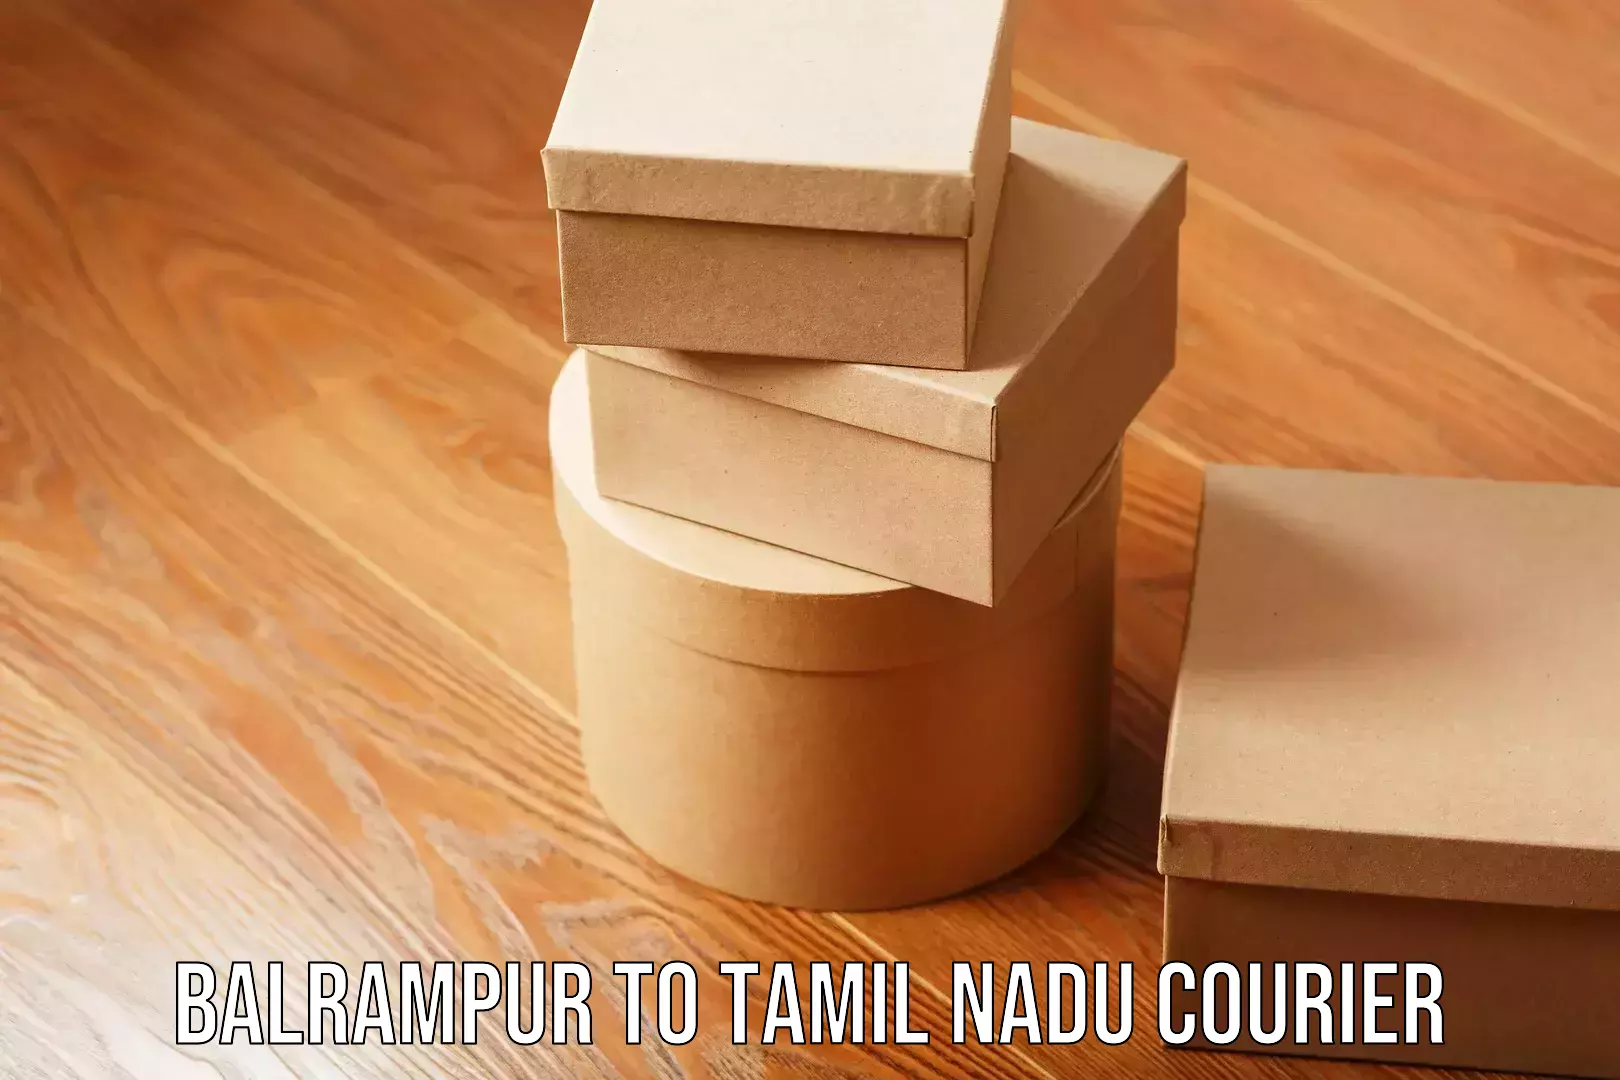 Reliable delivery network Balrampur to Tamil Nadu